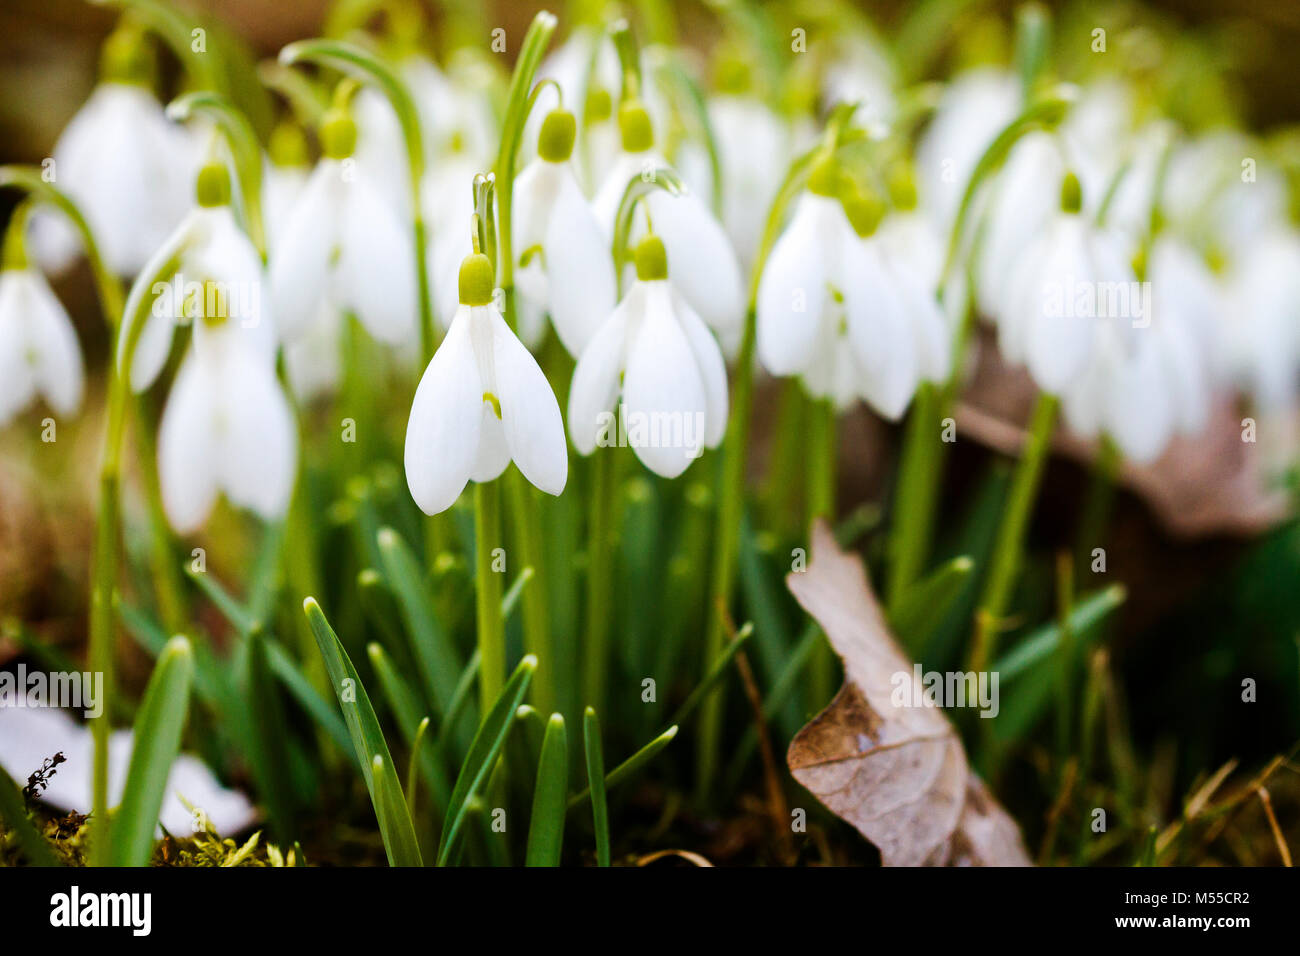 Closeup shot of fresh common snowdrops (Galanthus nivalis) blooming in the spring. Wild flowers field. Stock Photo